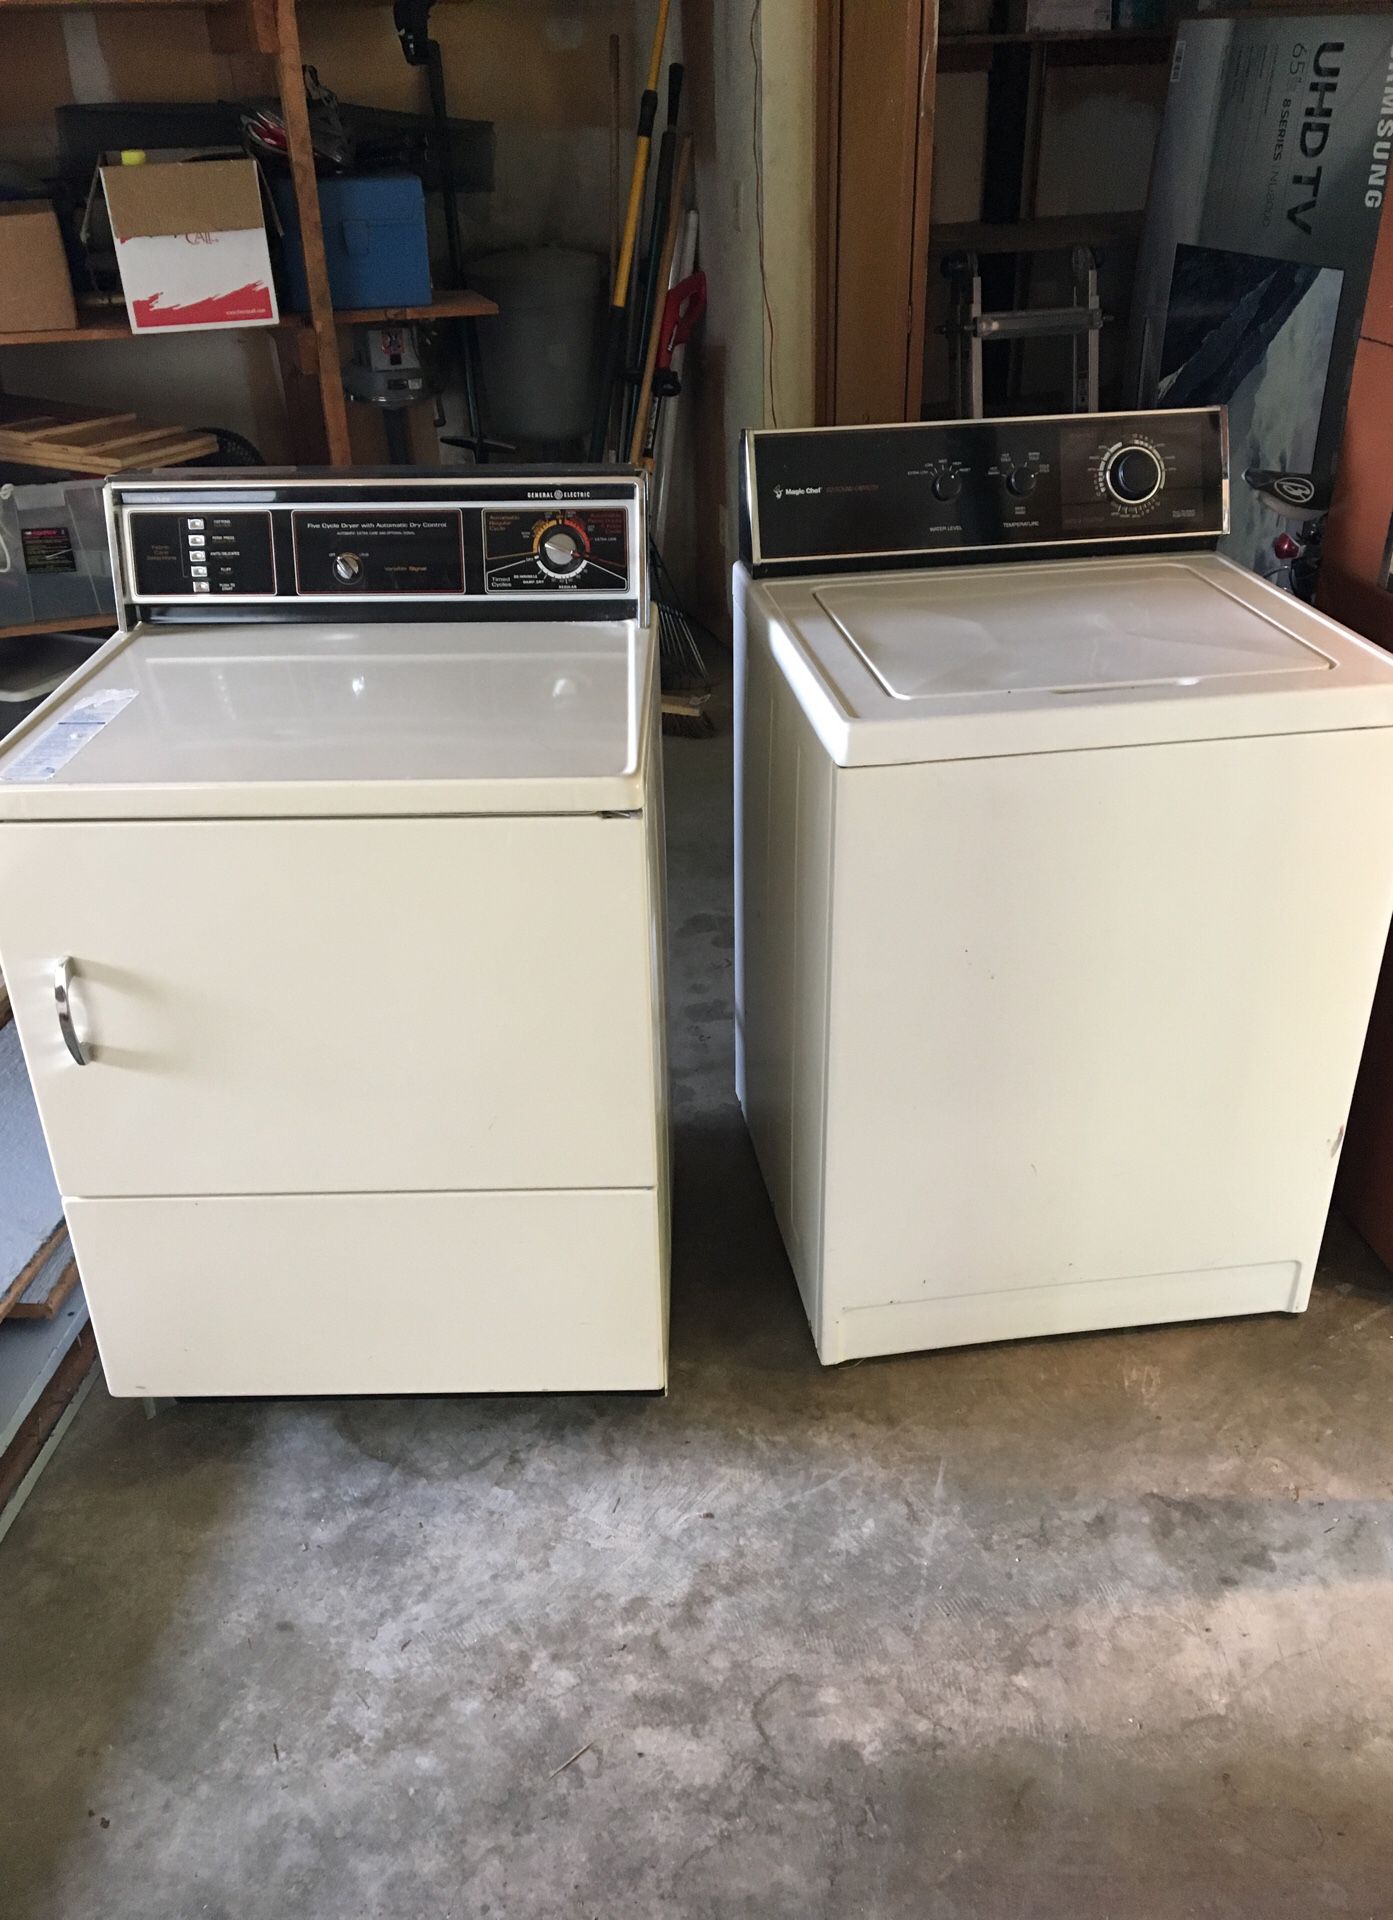 Old school washer and dryer. Works great